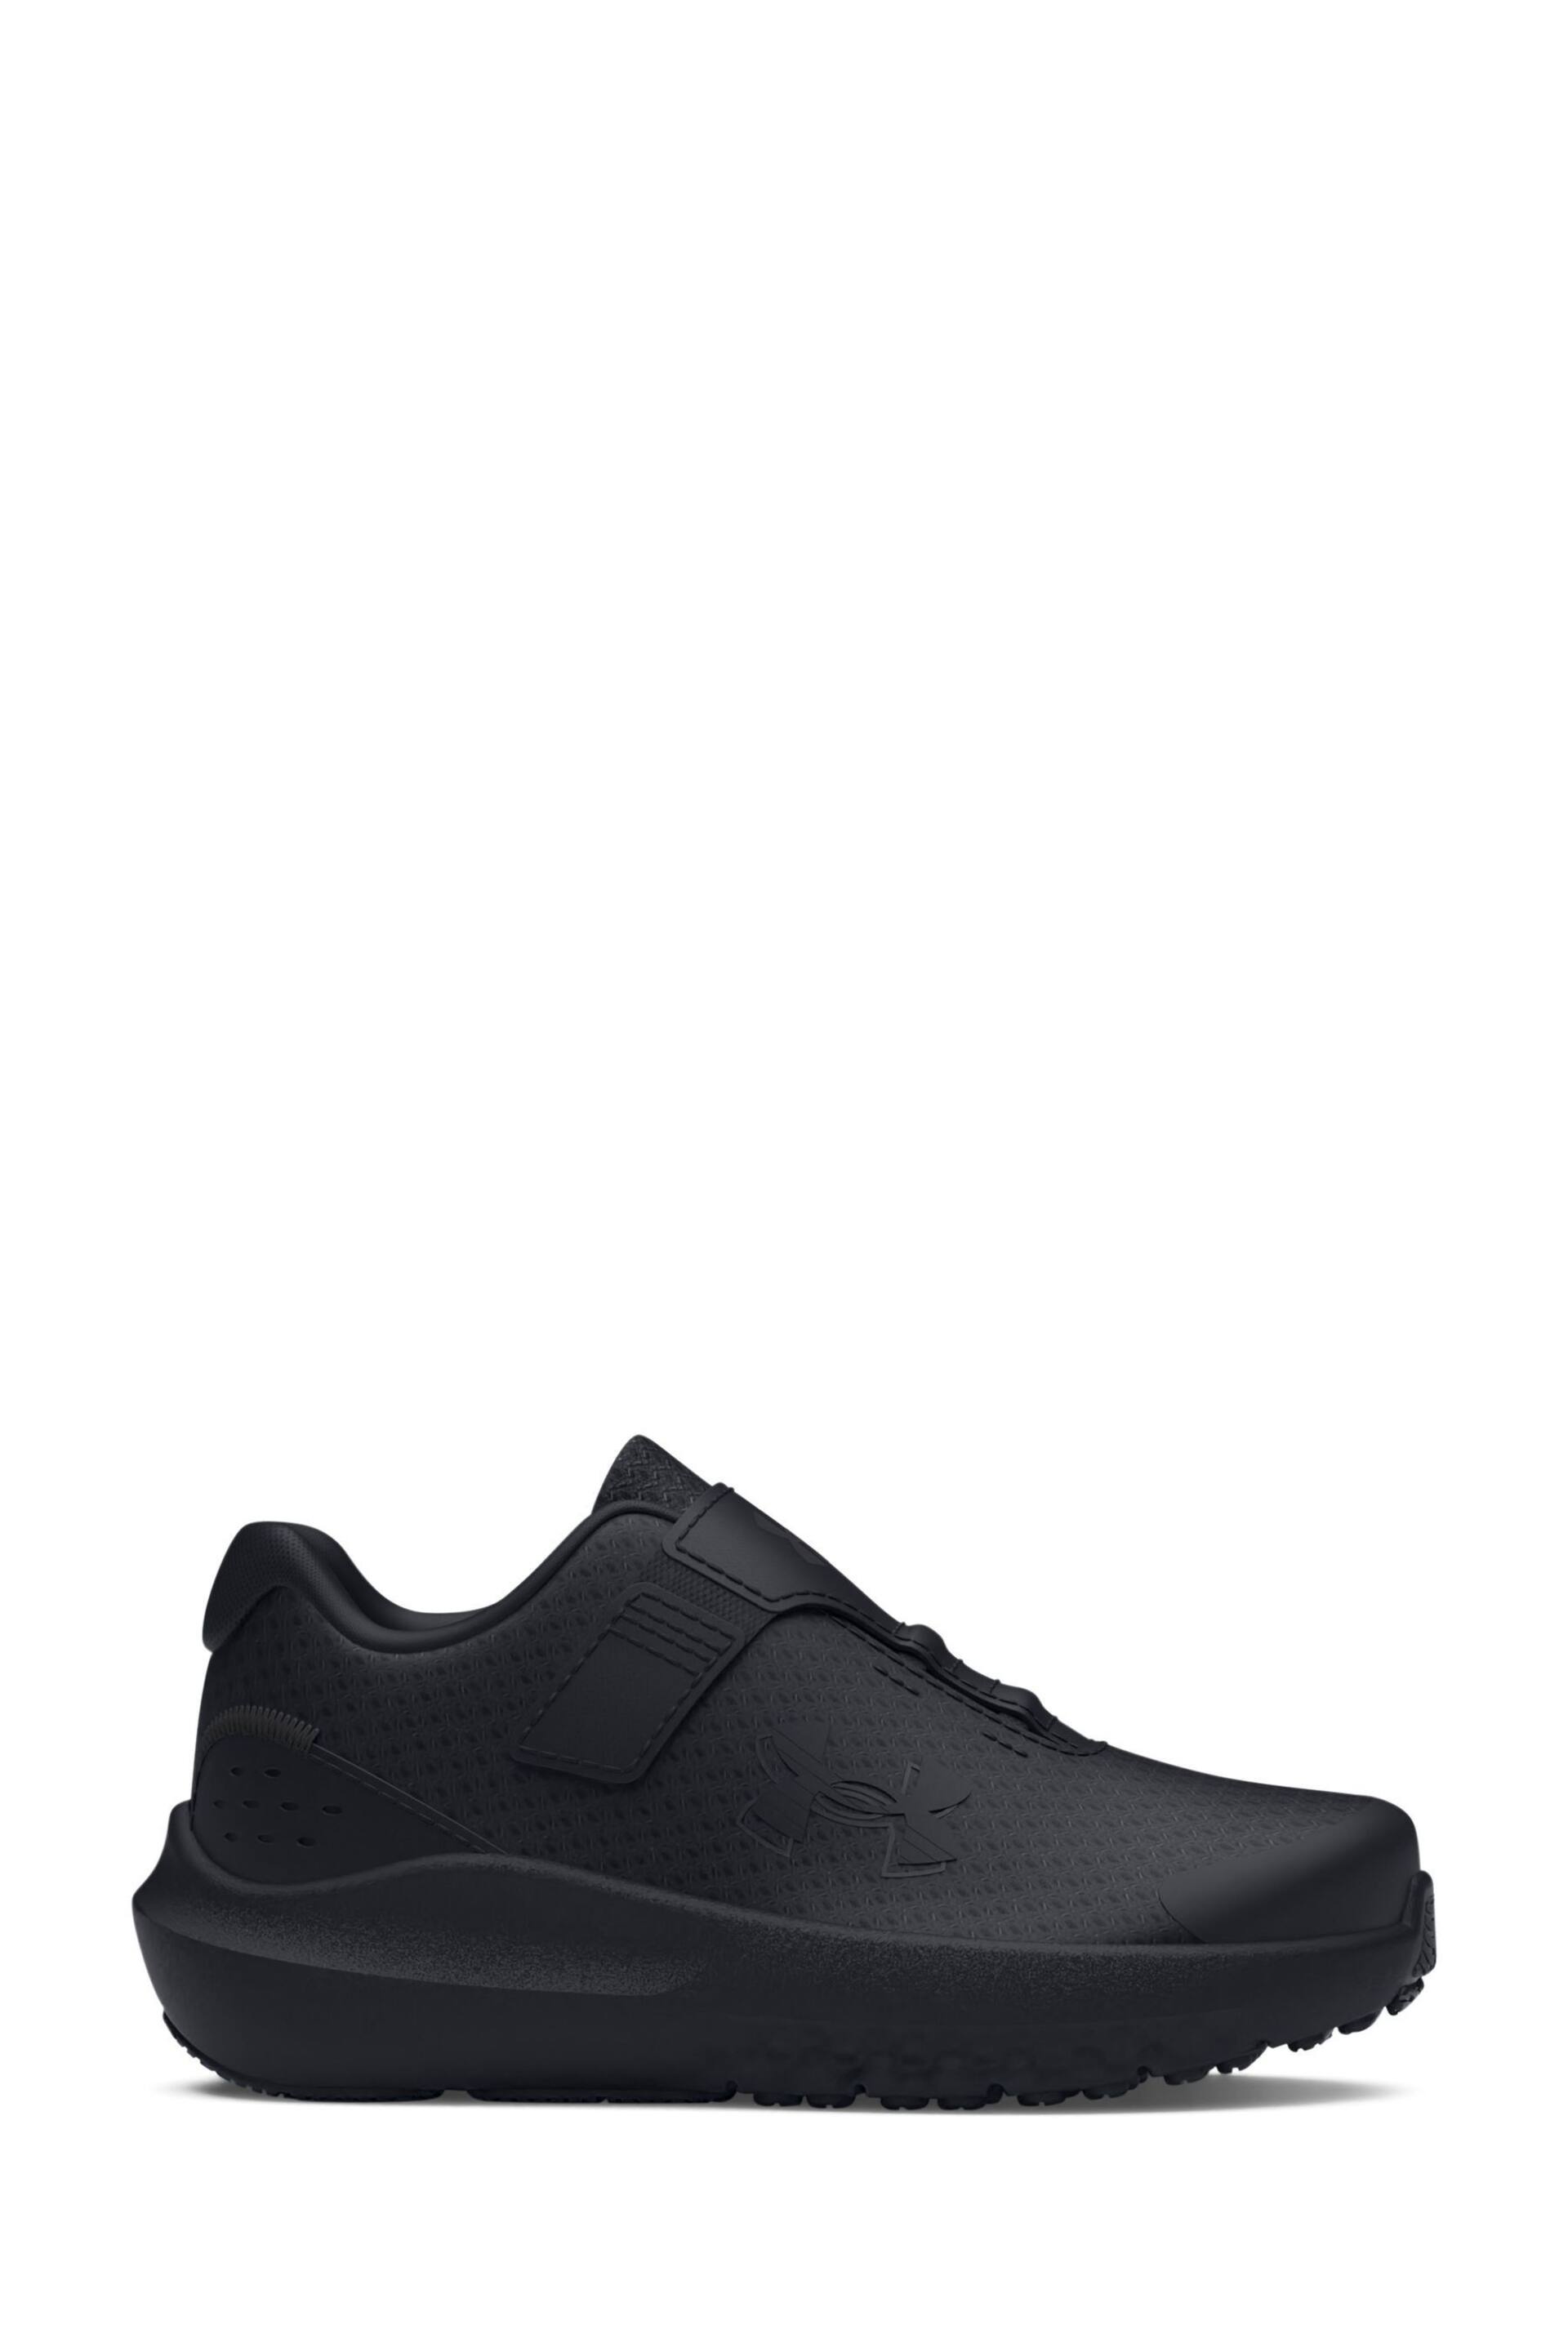 Under Armour Black Surge 4 Trainers - Image 1 of 6